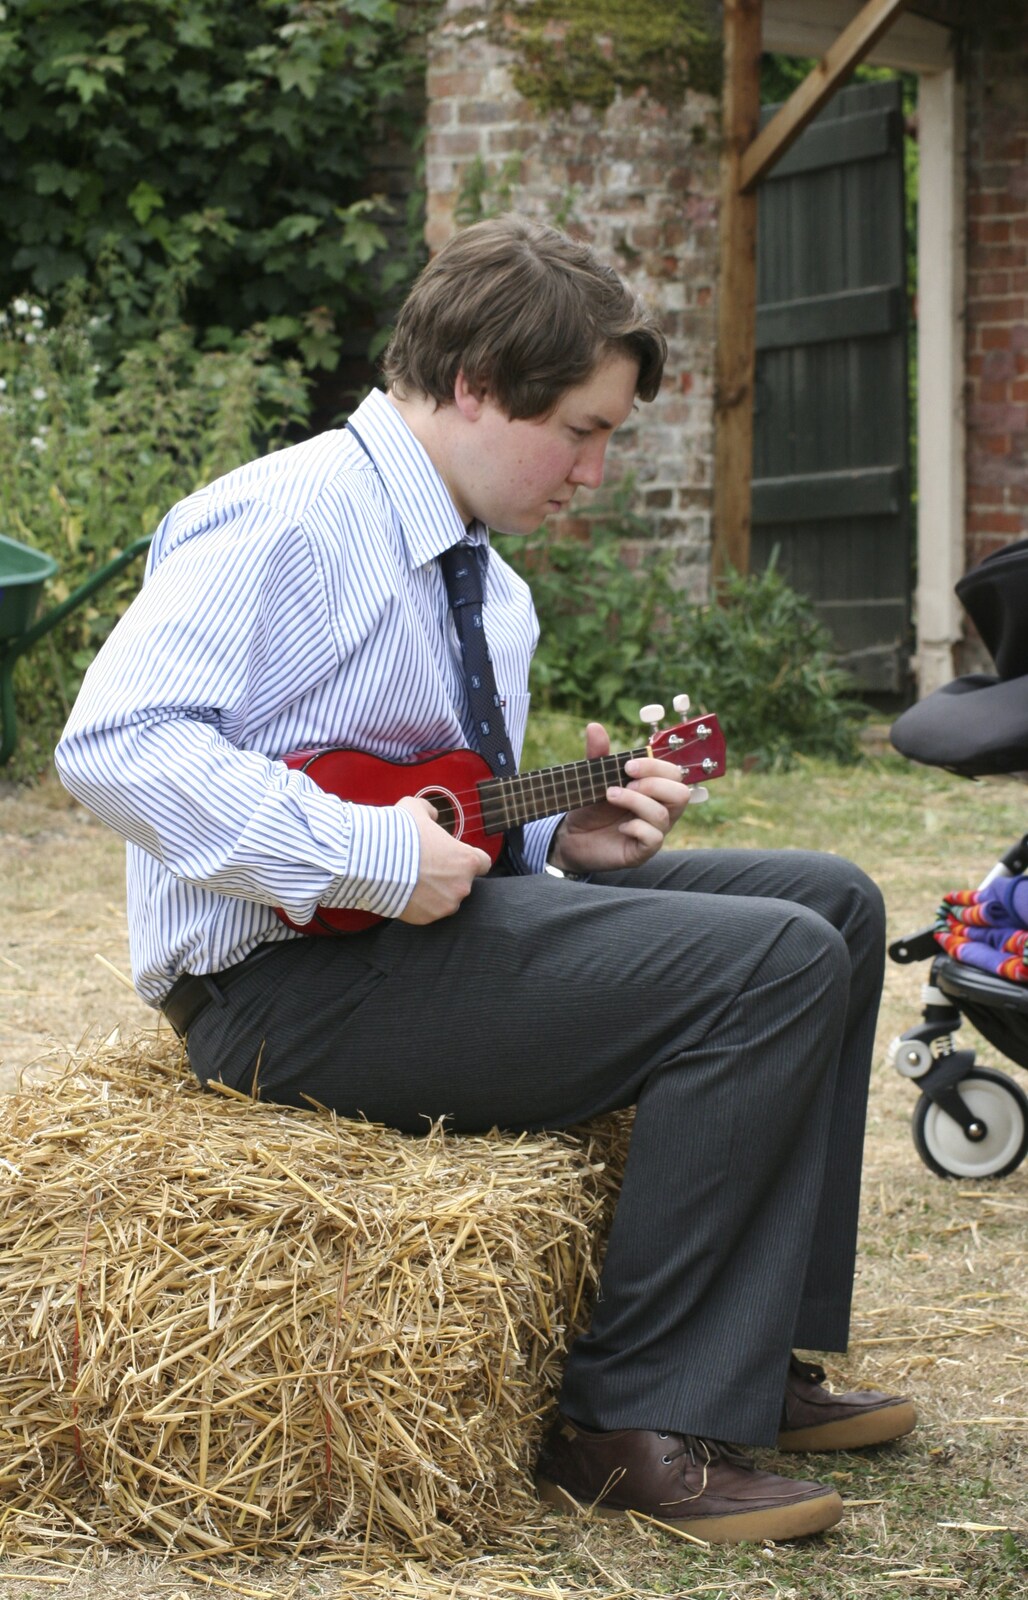 Eoghan plays ukulele on a straw bale from Nosher and Isobel's Wedding, Brome, Suffolk - 3rd July 2010